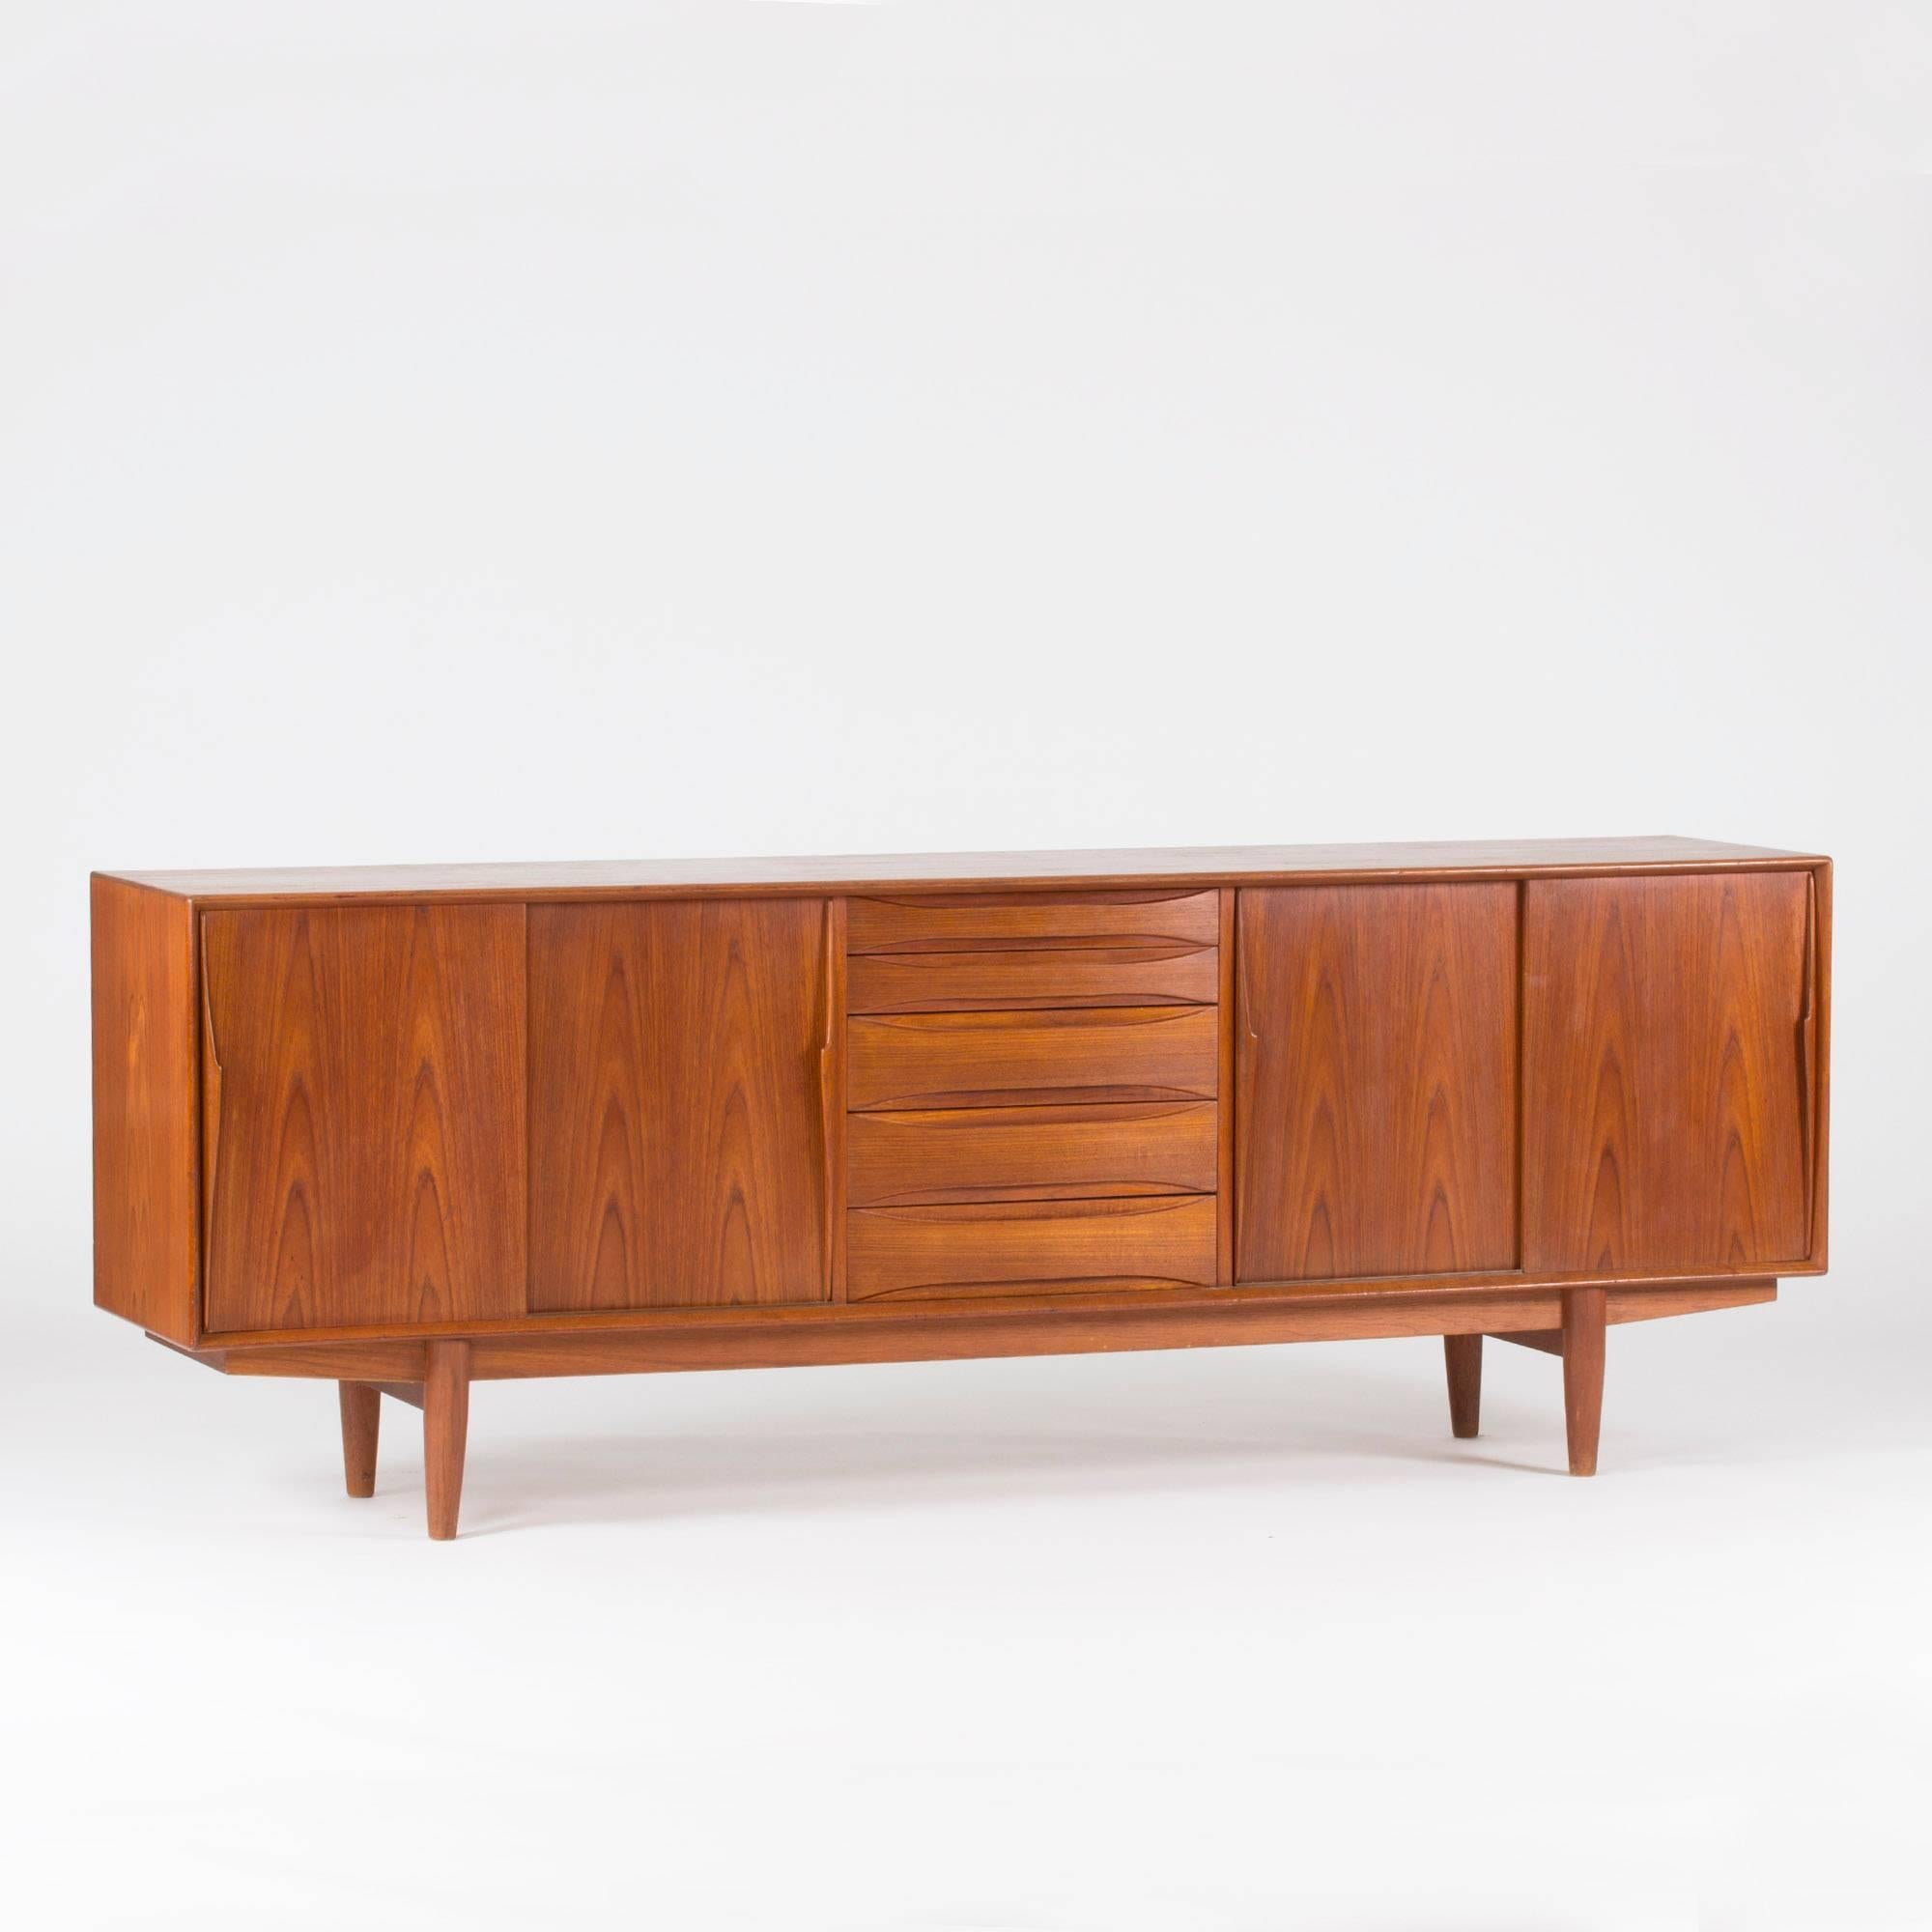 Teak sideboard from Skovby Møbelfabrik with beautiful sculptural handles and drawers. Warm teak that creates a wonderful pattern on the fronts.